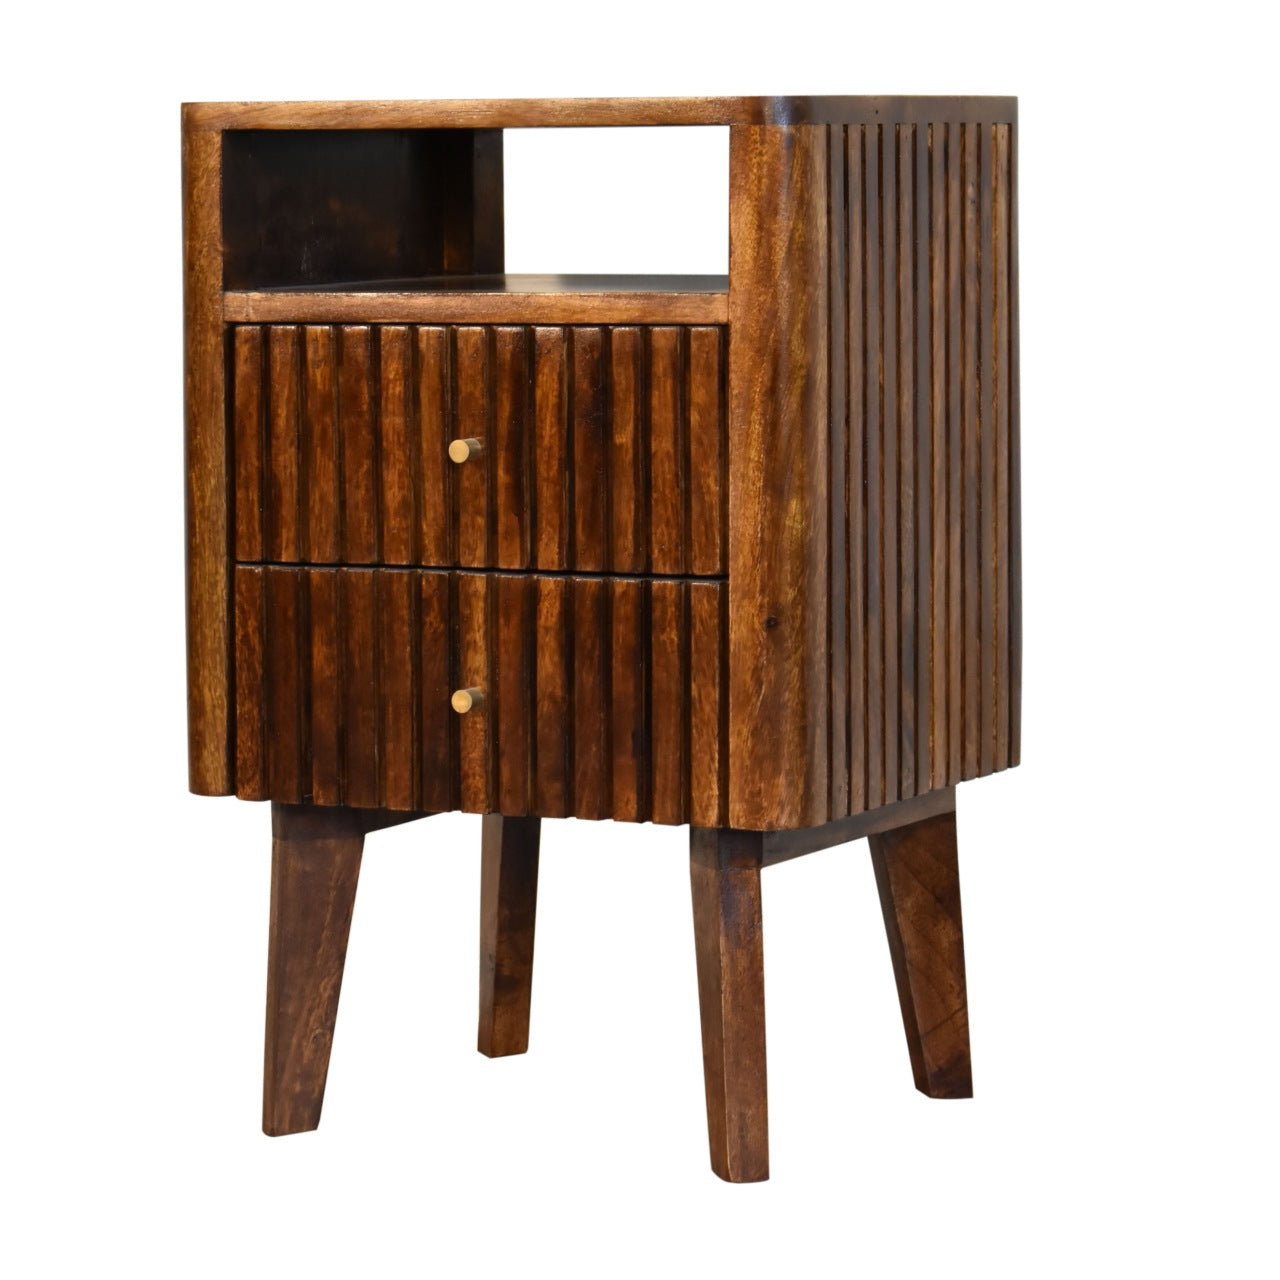 Reeve Bedside Table 2 Drawer Chest Chestnut Finish over Solid Mango Wood Nordic Style - CasaFenix